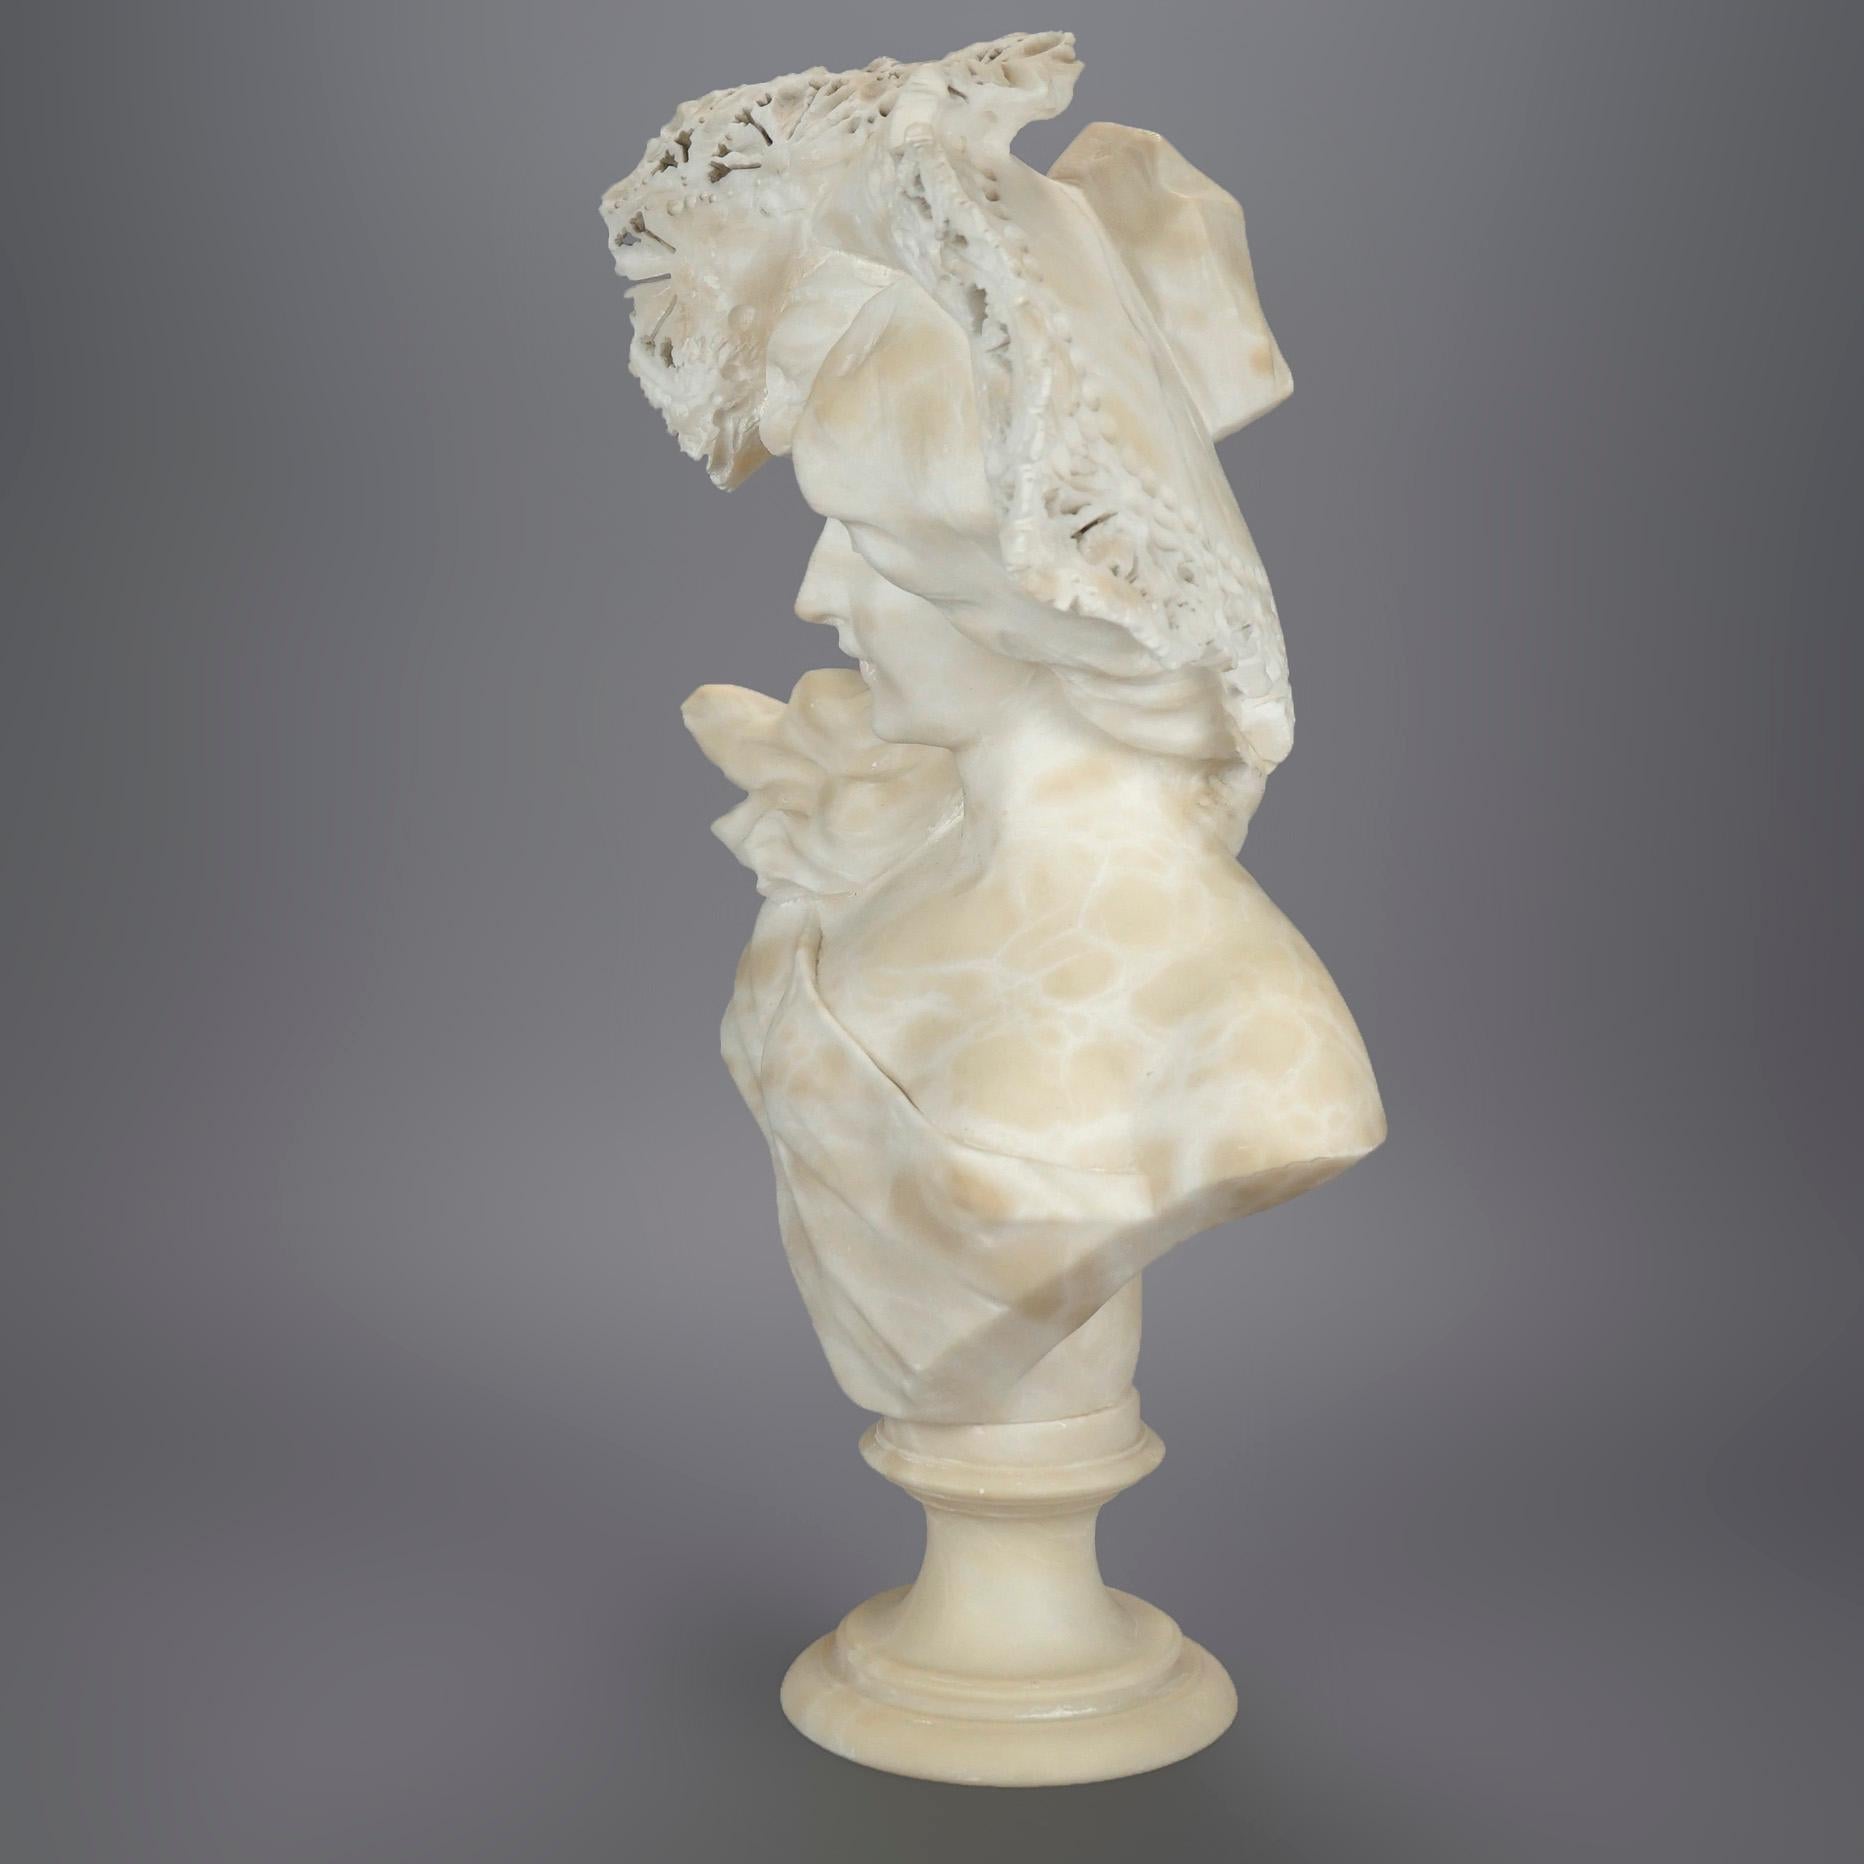 Carved Antique Alabaster Sculpture of a Woman 19th C